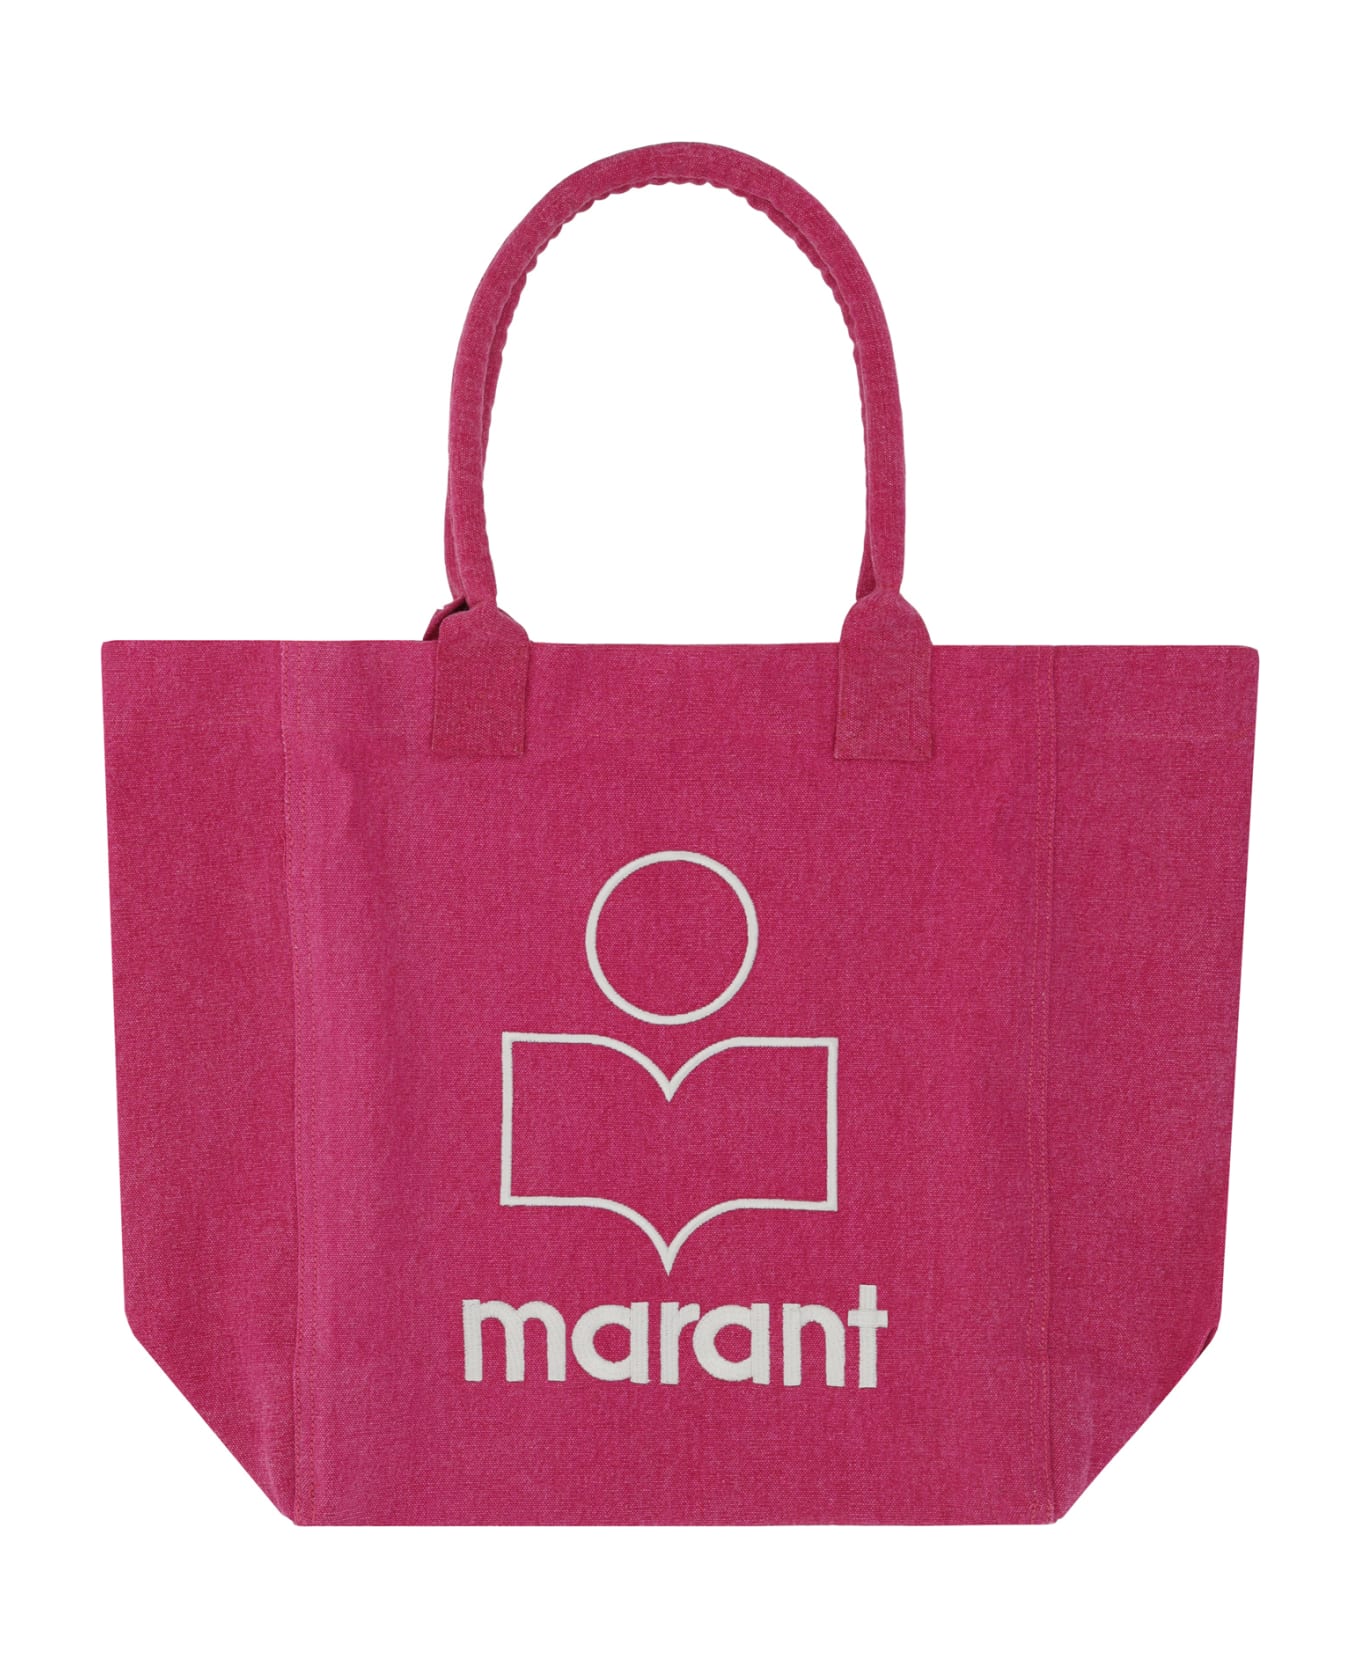 Isabel Marant Yenky Tote Bag - Pink トートバッグ